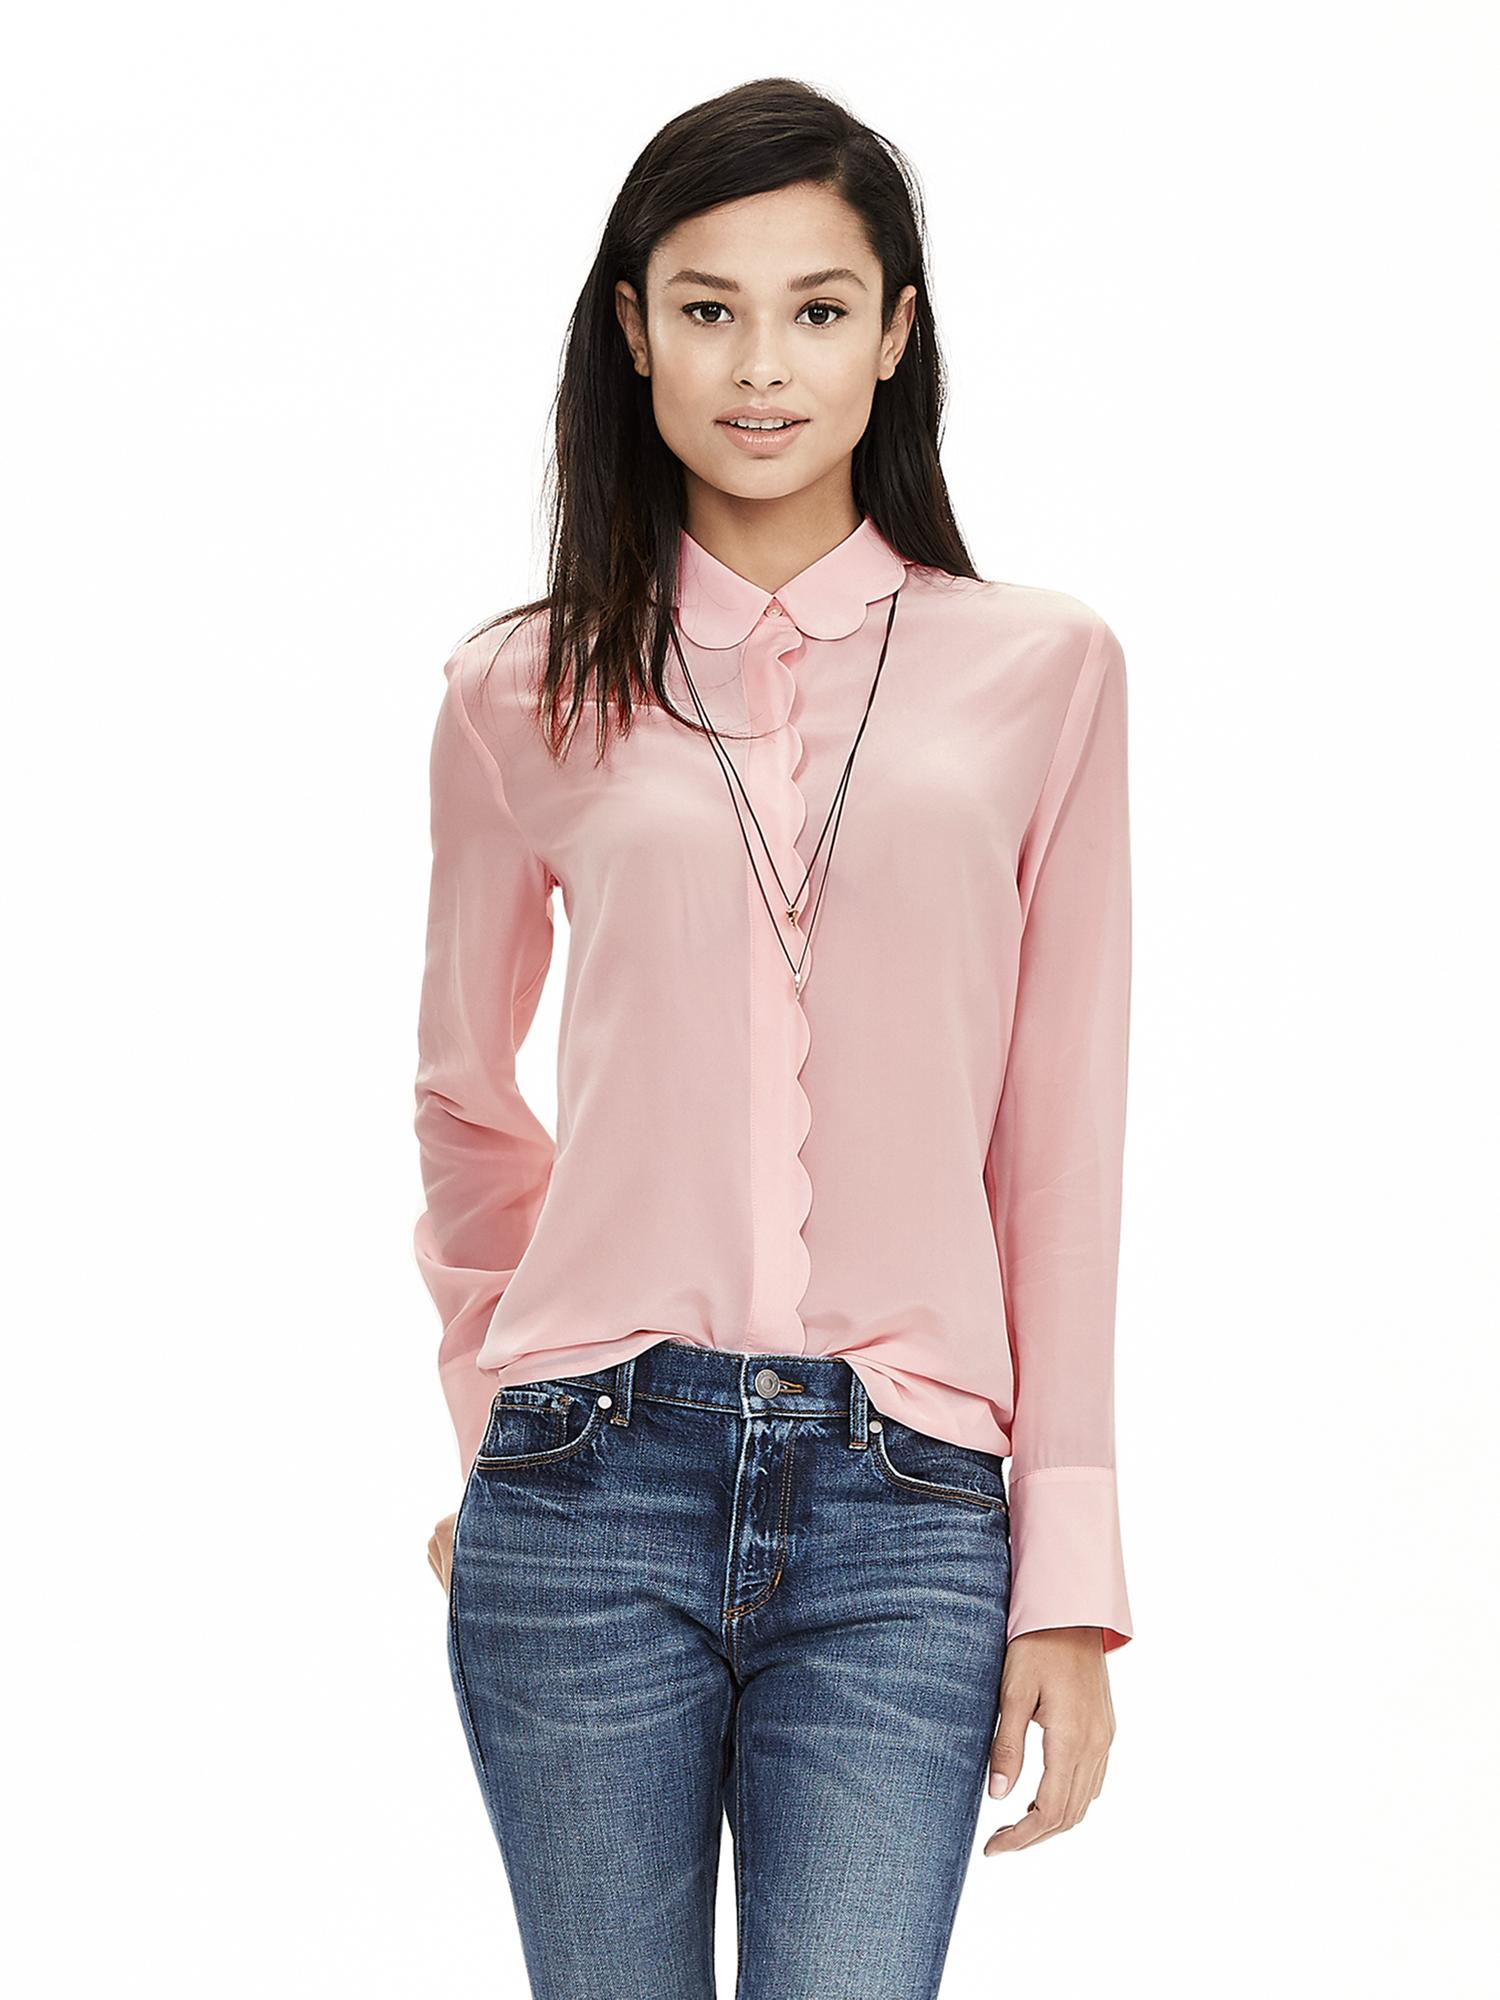 Lyst - Banana Republic Scalloped Pink Silk Blouse in Pink